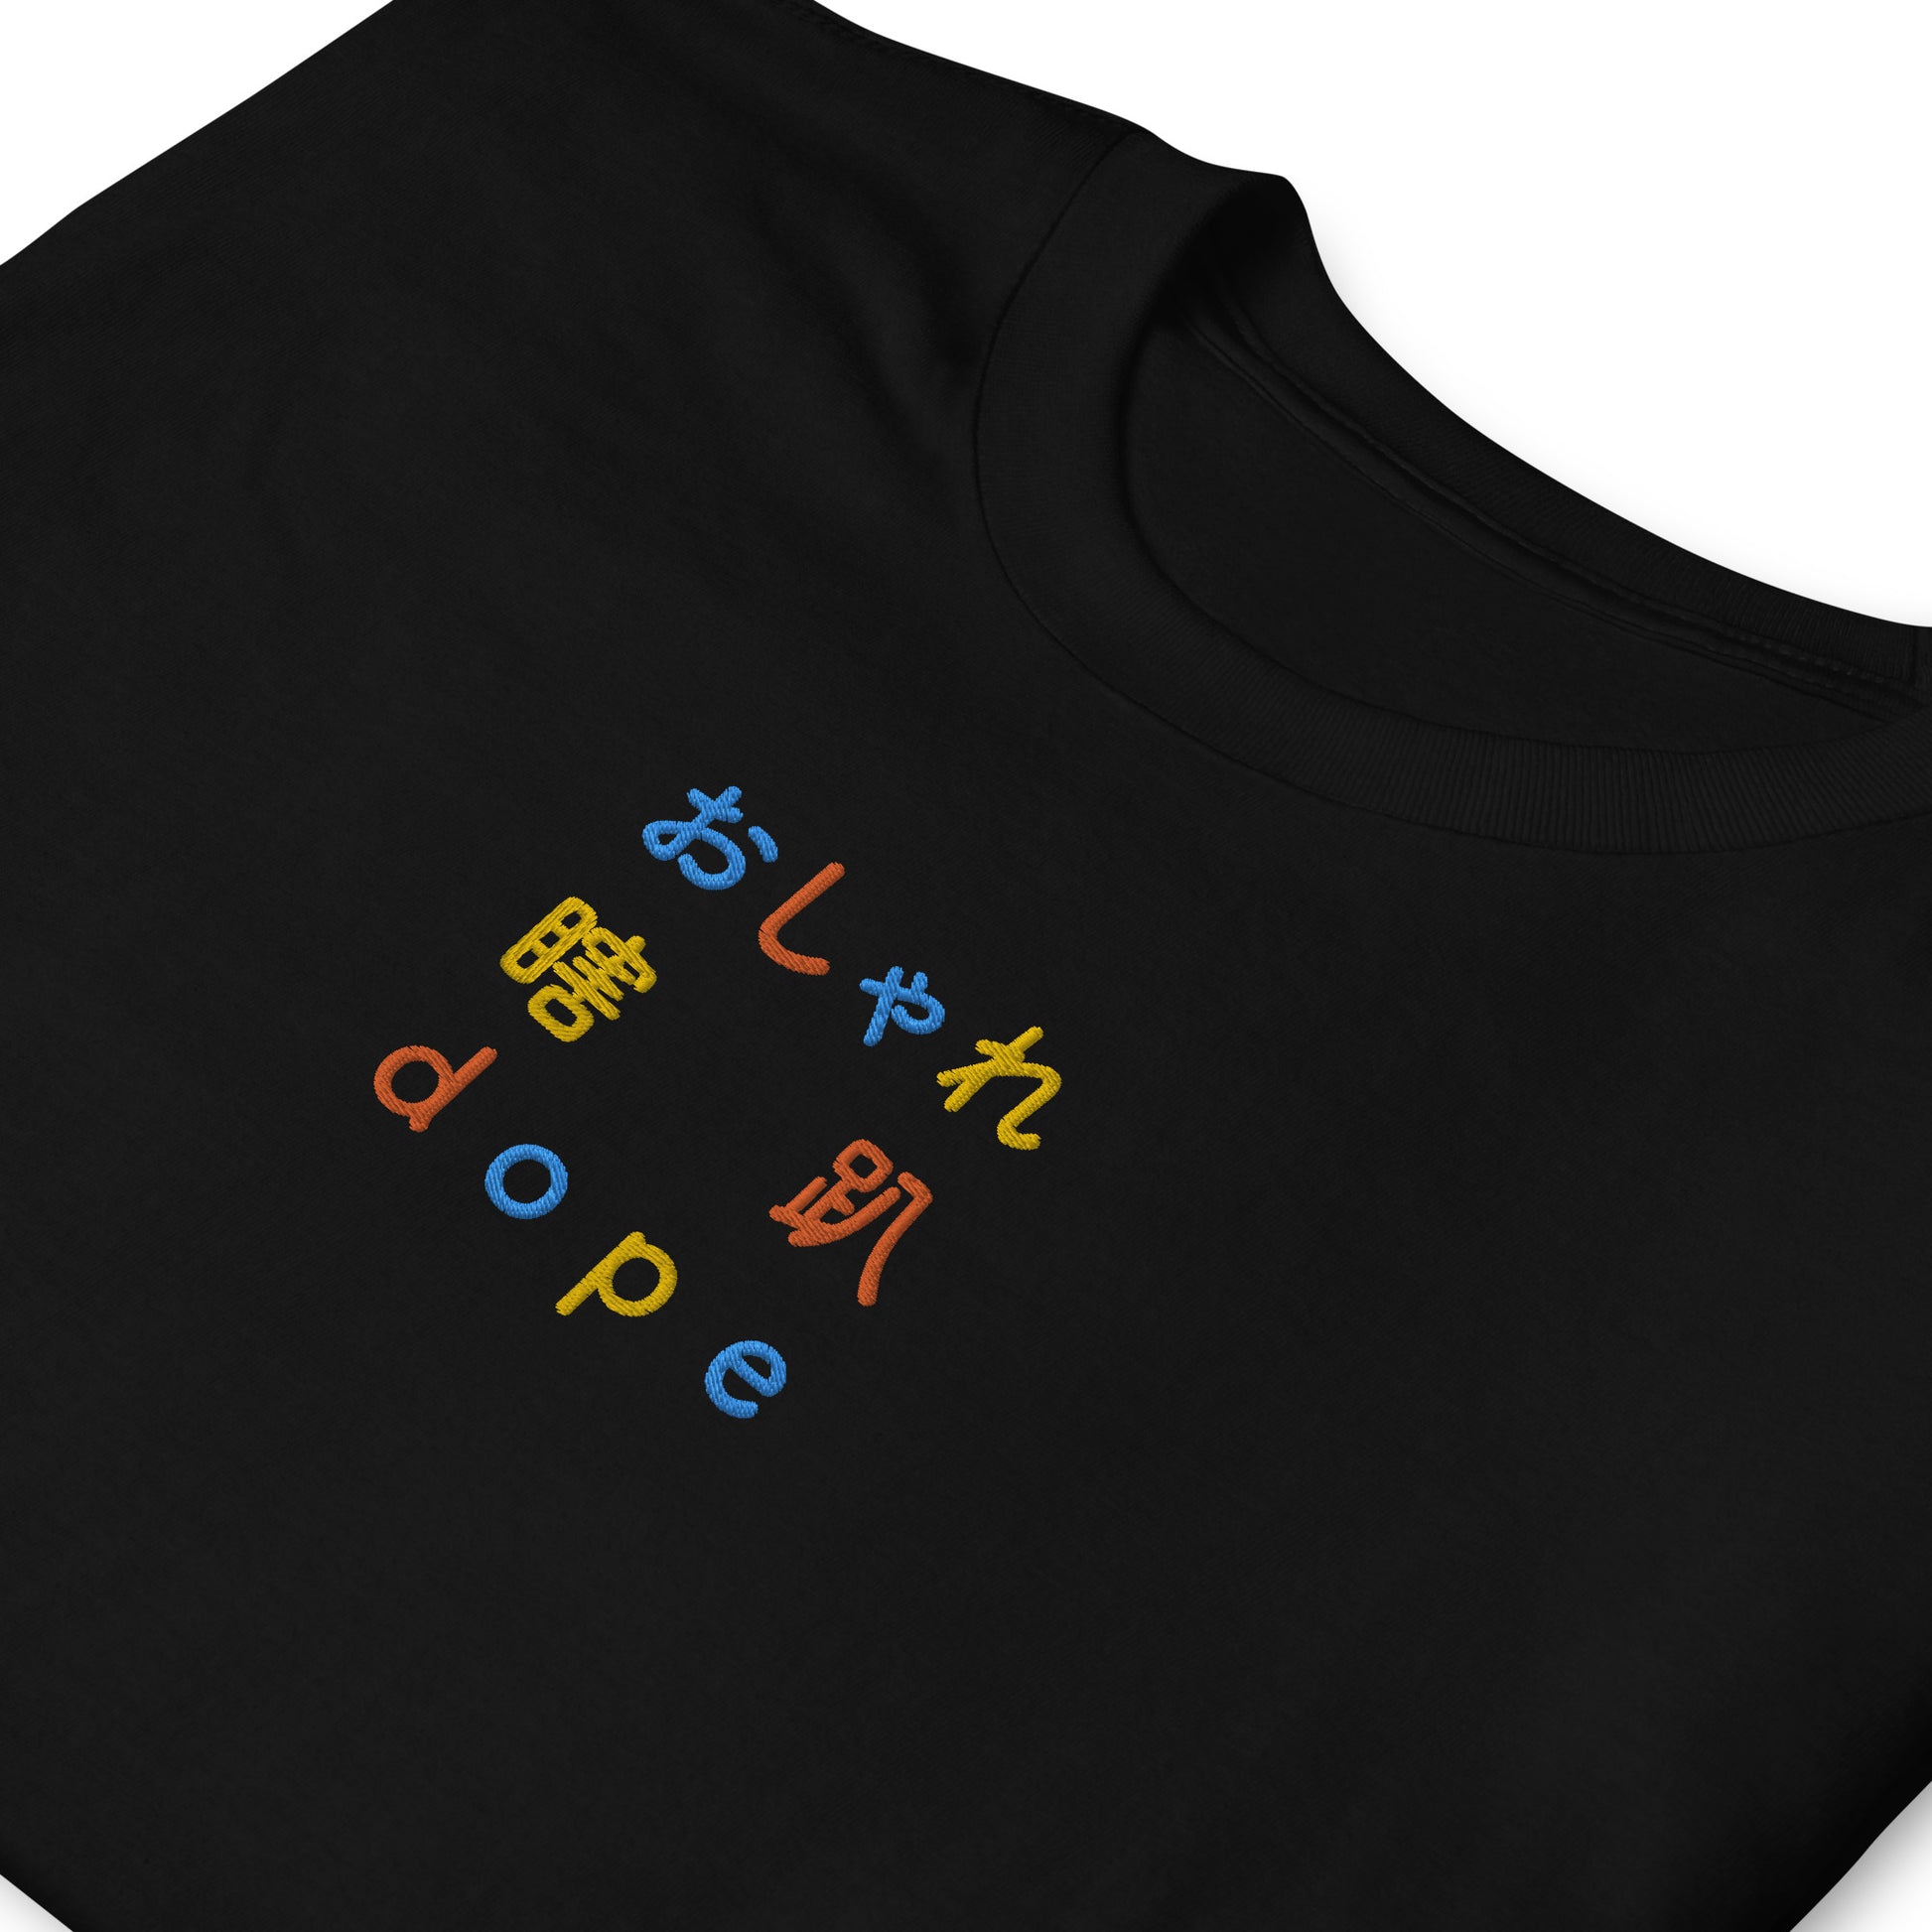 Black High Quality Tee - Front Design with an Blue, Orange, Yellow Embroidery "Dope" in Japanese,Chinese and English